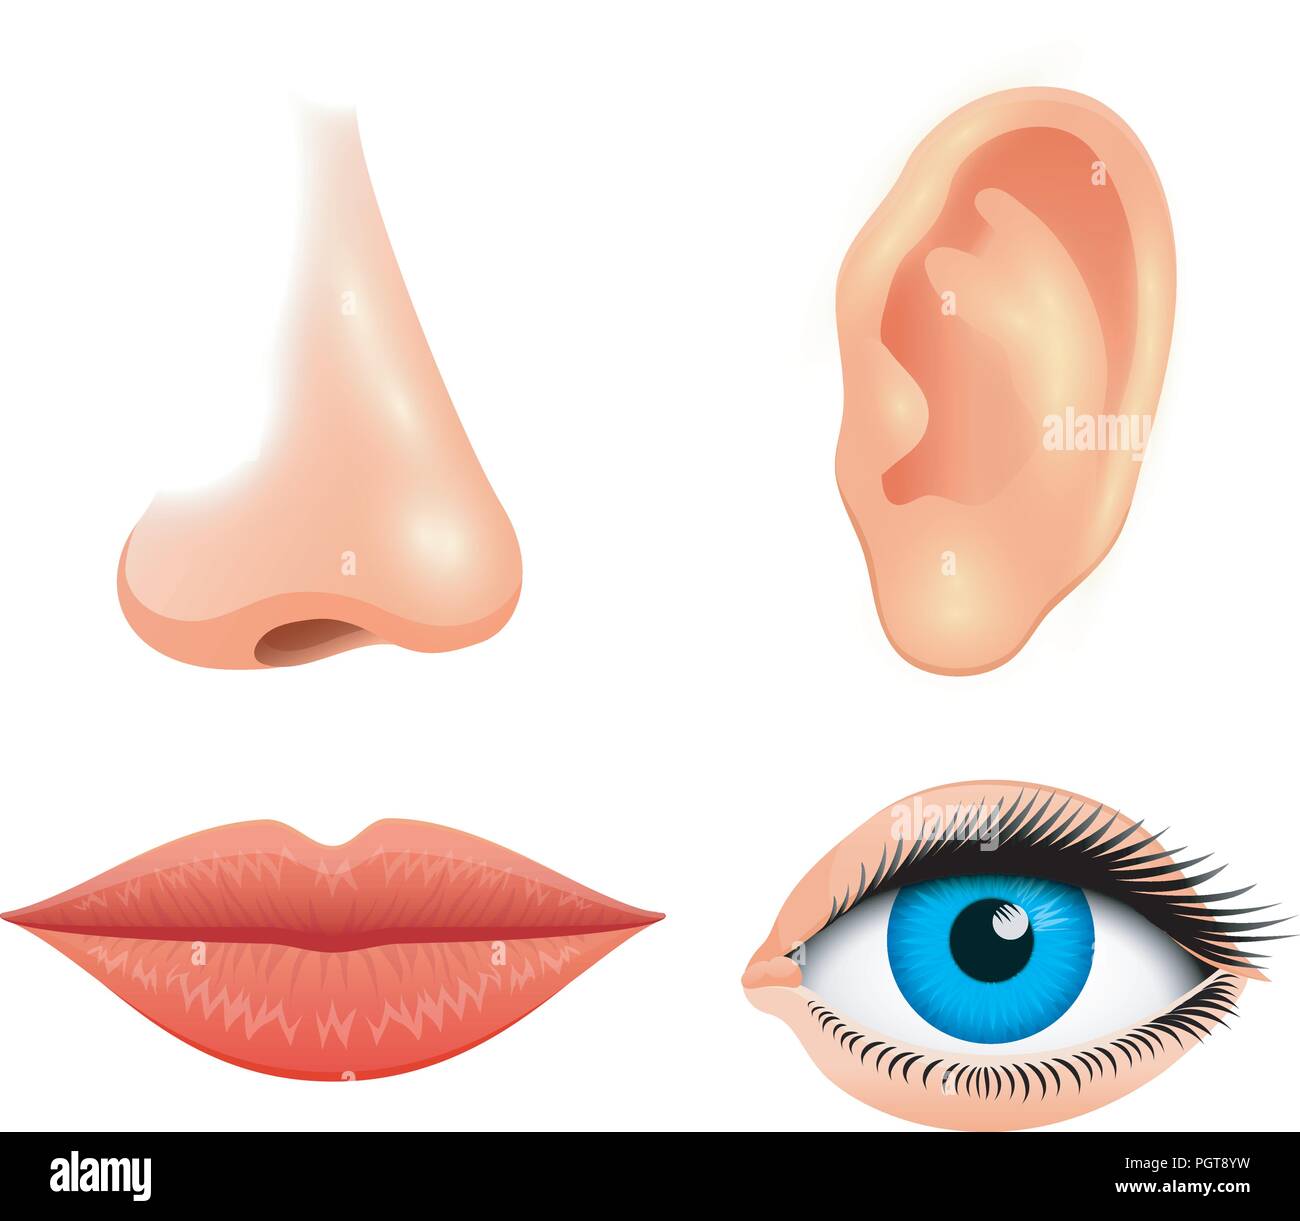 Human biology, sensory organs, anatomy illustration. face detailed kiss or lips, nose and ear, eye or view. set medical science or healthy man. vision, hearing, taste, smell, touch, look, europeoid. Stock Vector